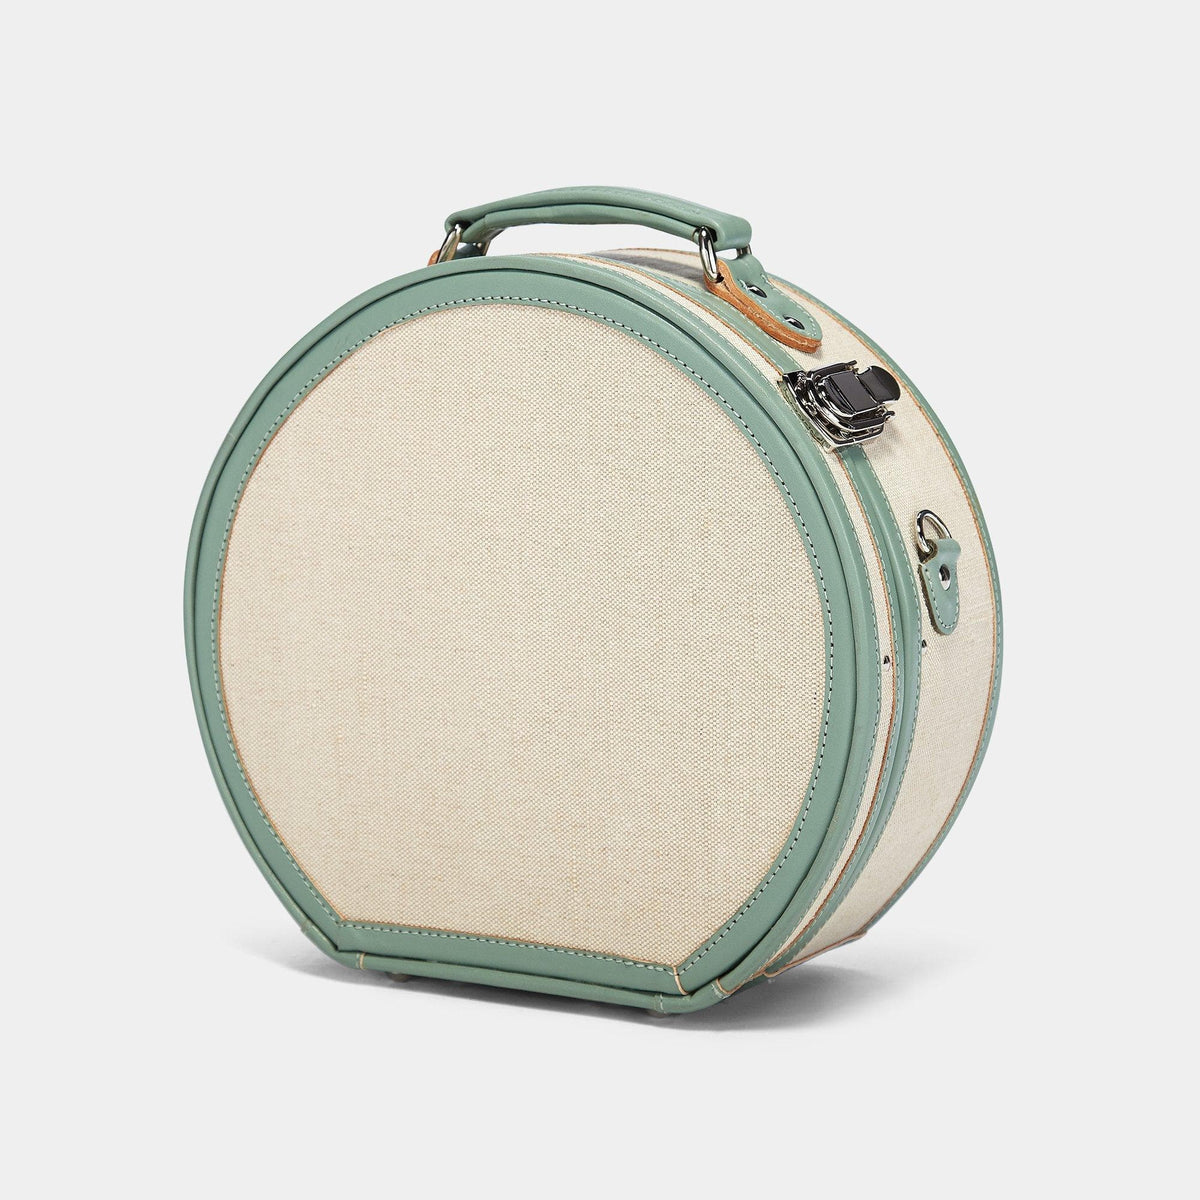 The Green Small Editor Hatbox  Teal Round Suitcase & Hat Box